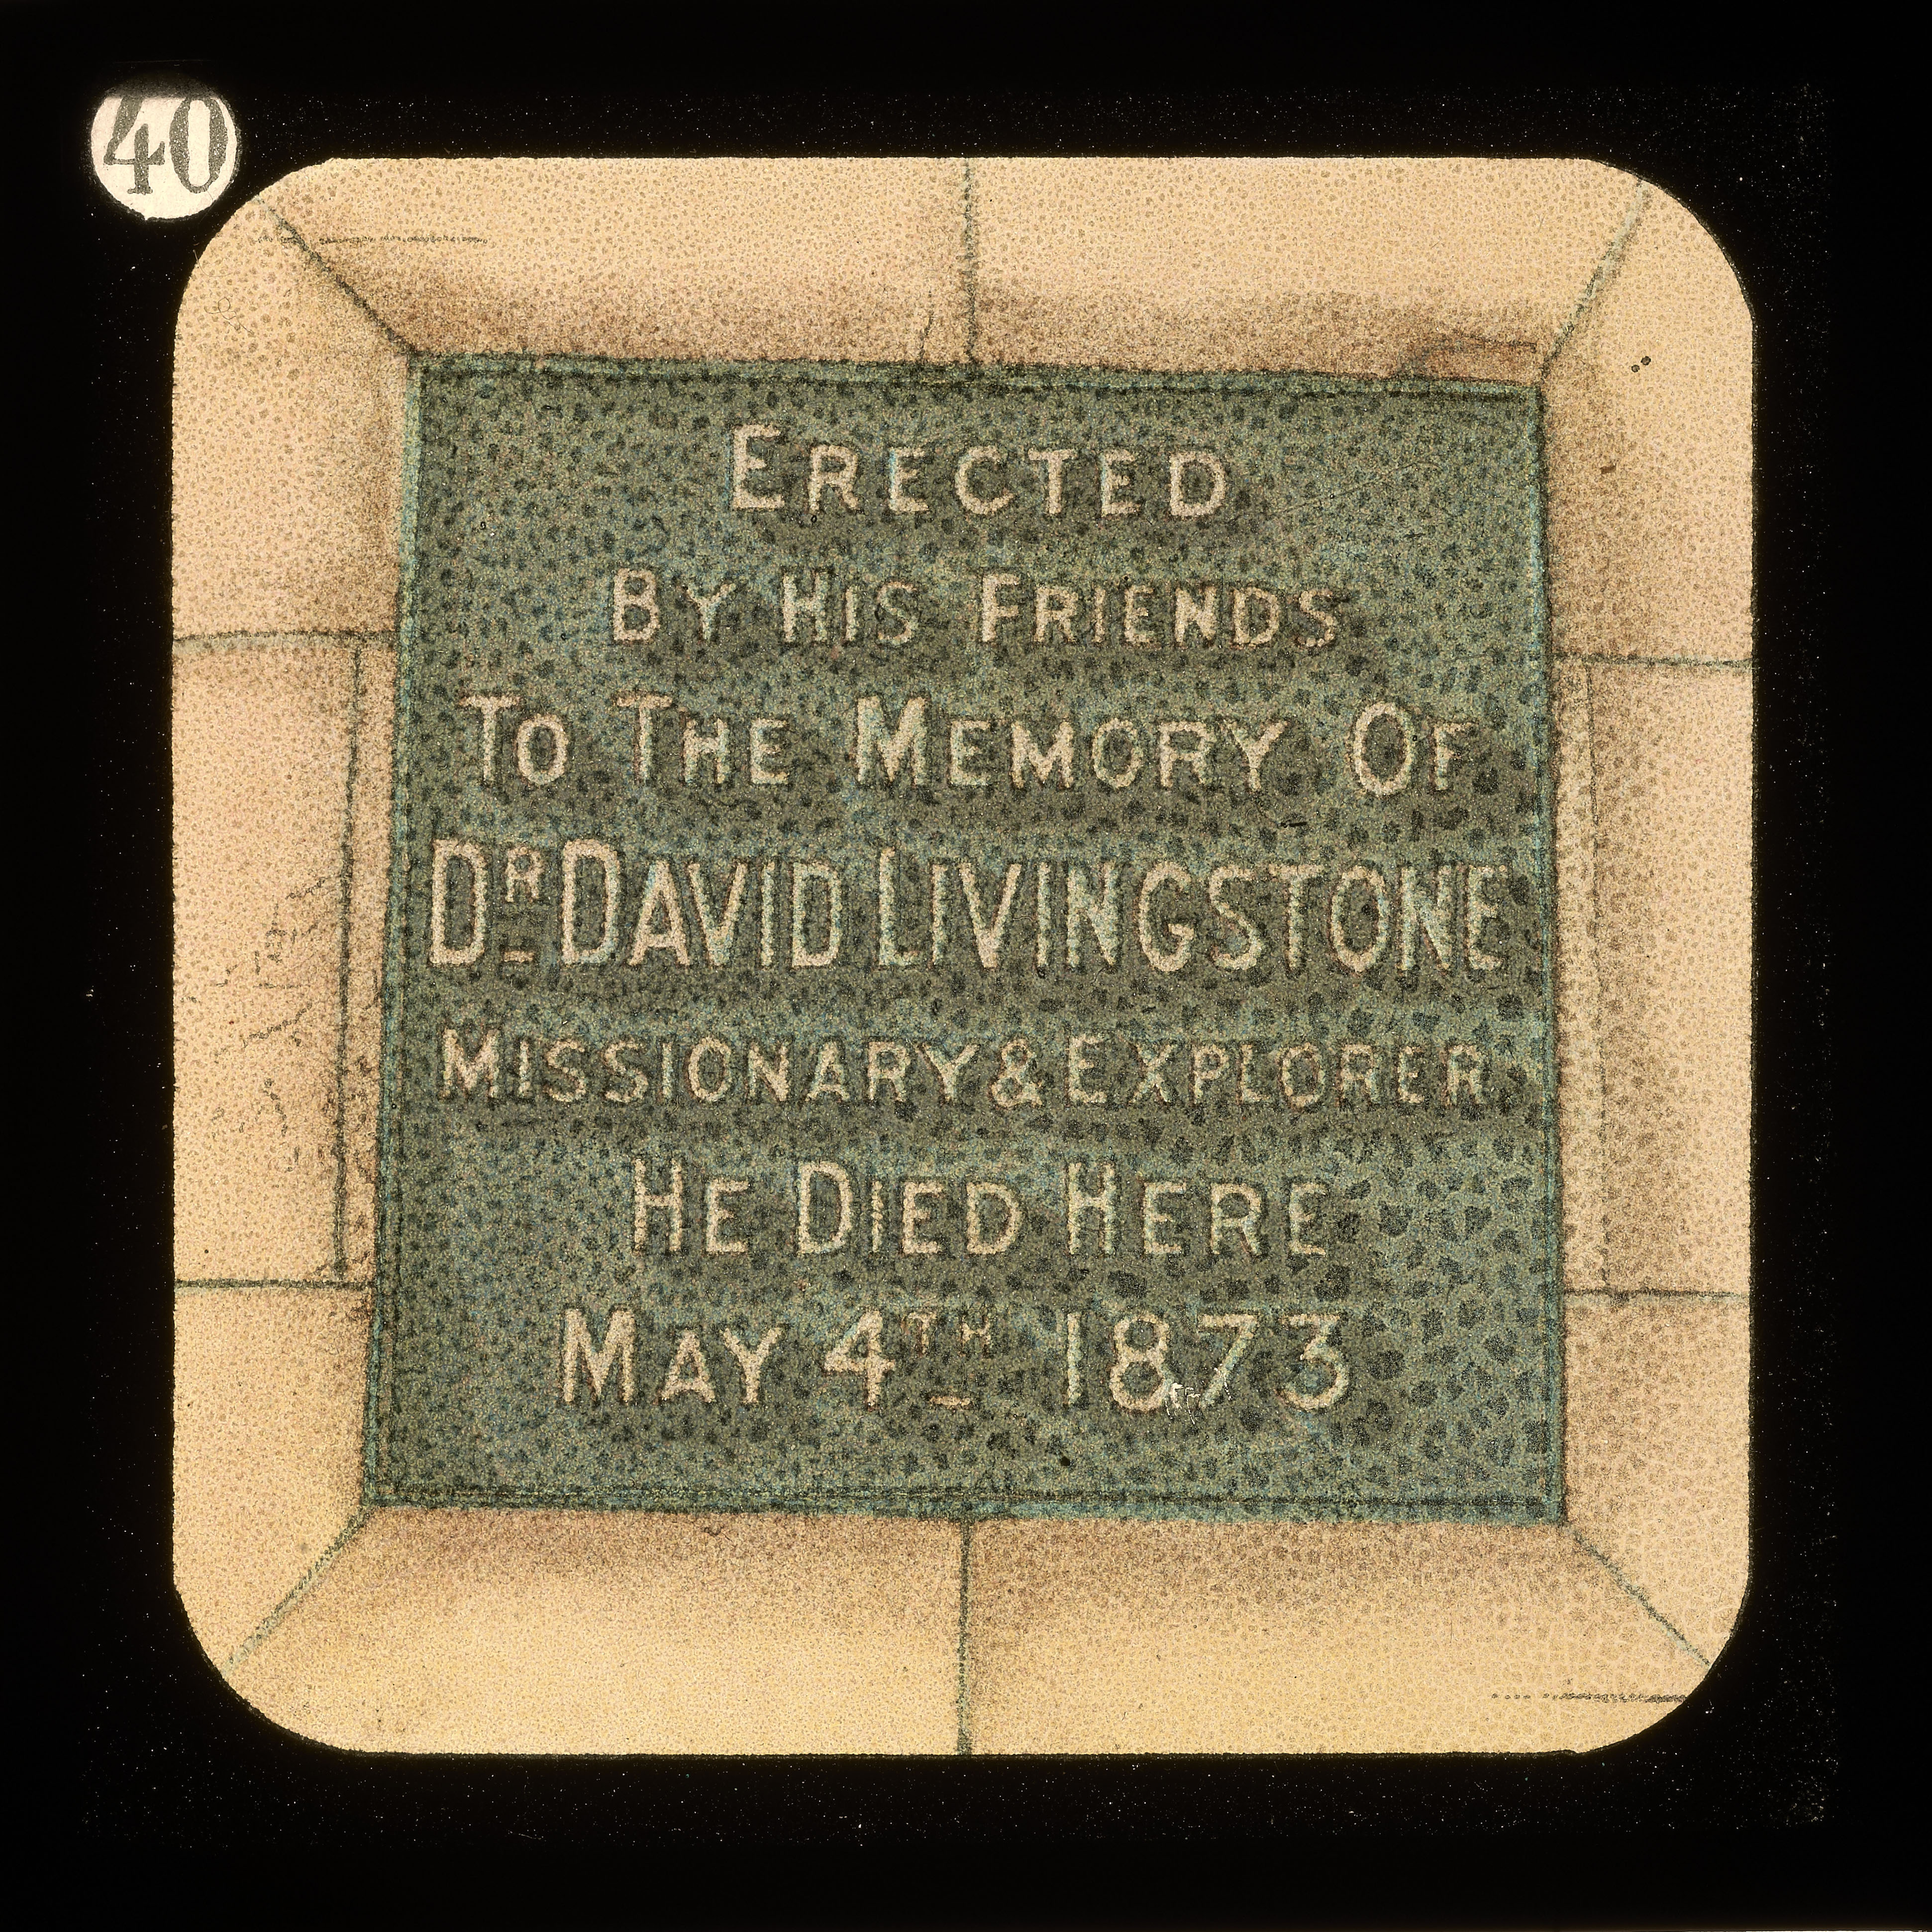 Inscription from David Livingstone Memorial, Chitambo's Village, Zambia. Lantern Slide from the Life, Adventures, and Work of David Livingstone (Anon. 1900: [40]). Image courtesy of the Smithsonian Libraries, Washington, D.C.